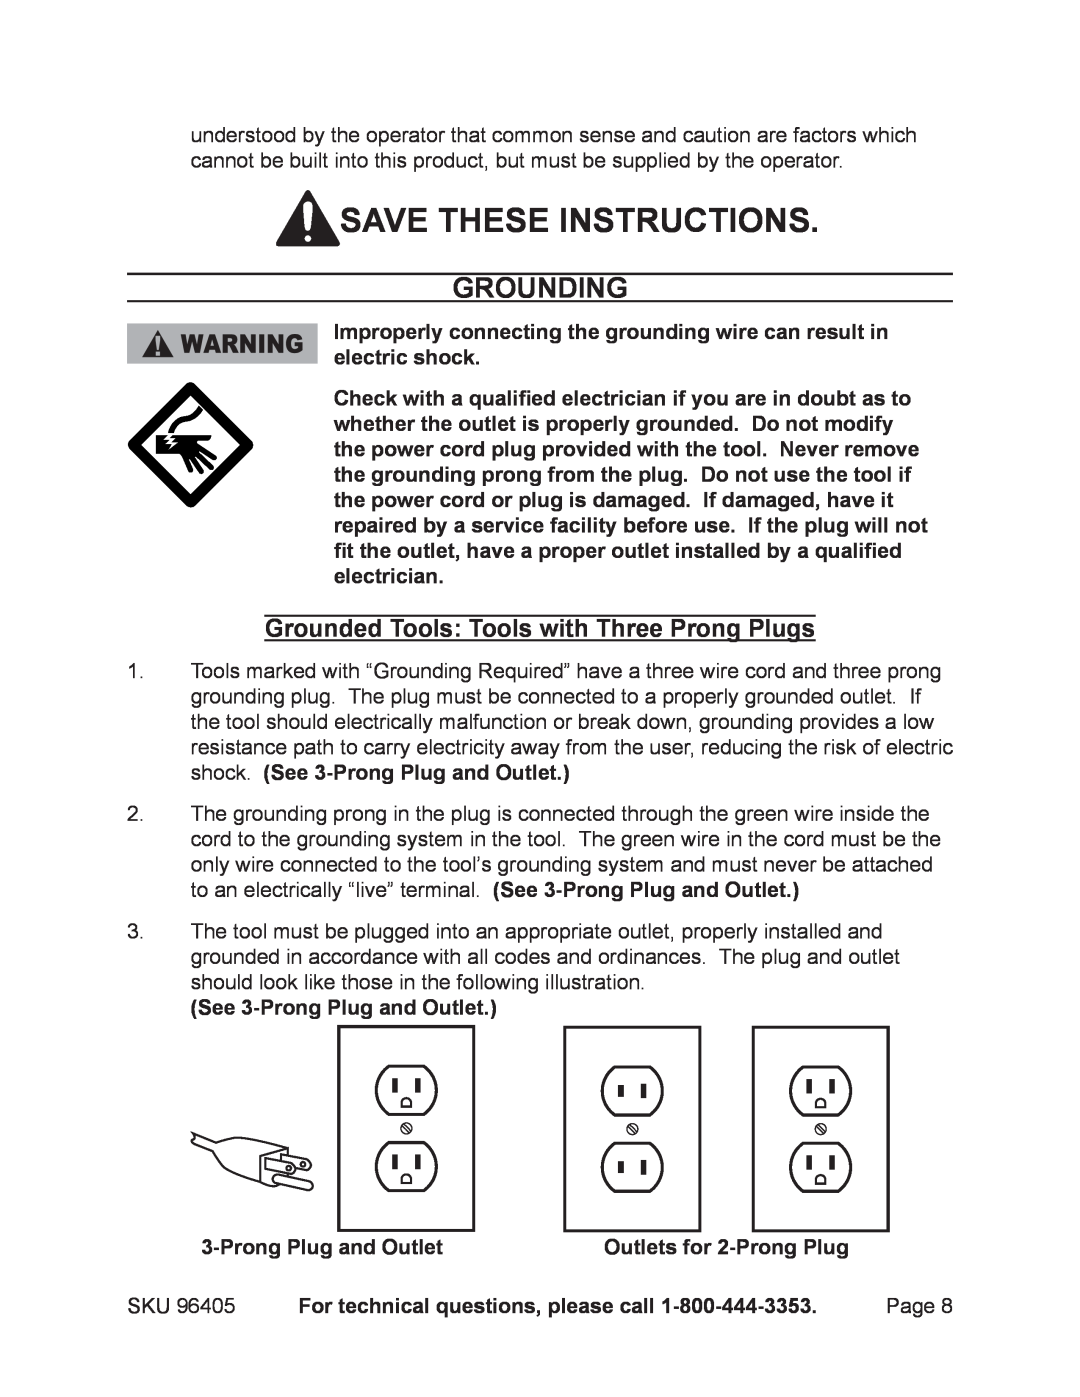 Chicago Electric 96405 manual Save these instructions, Grounding 